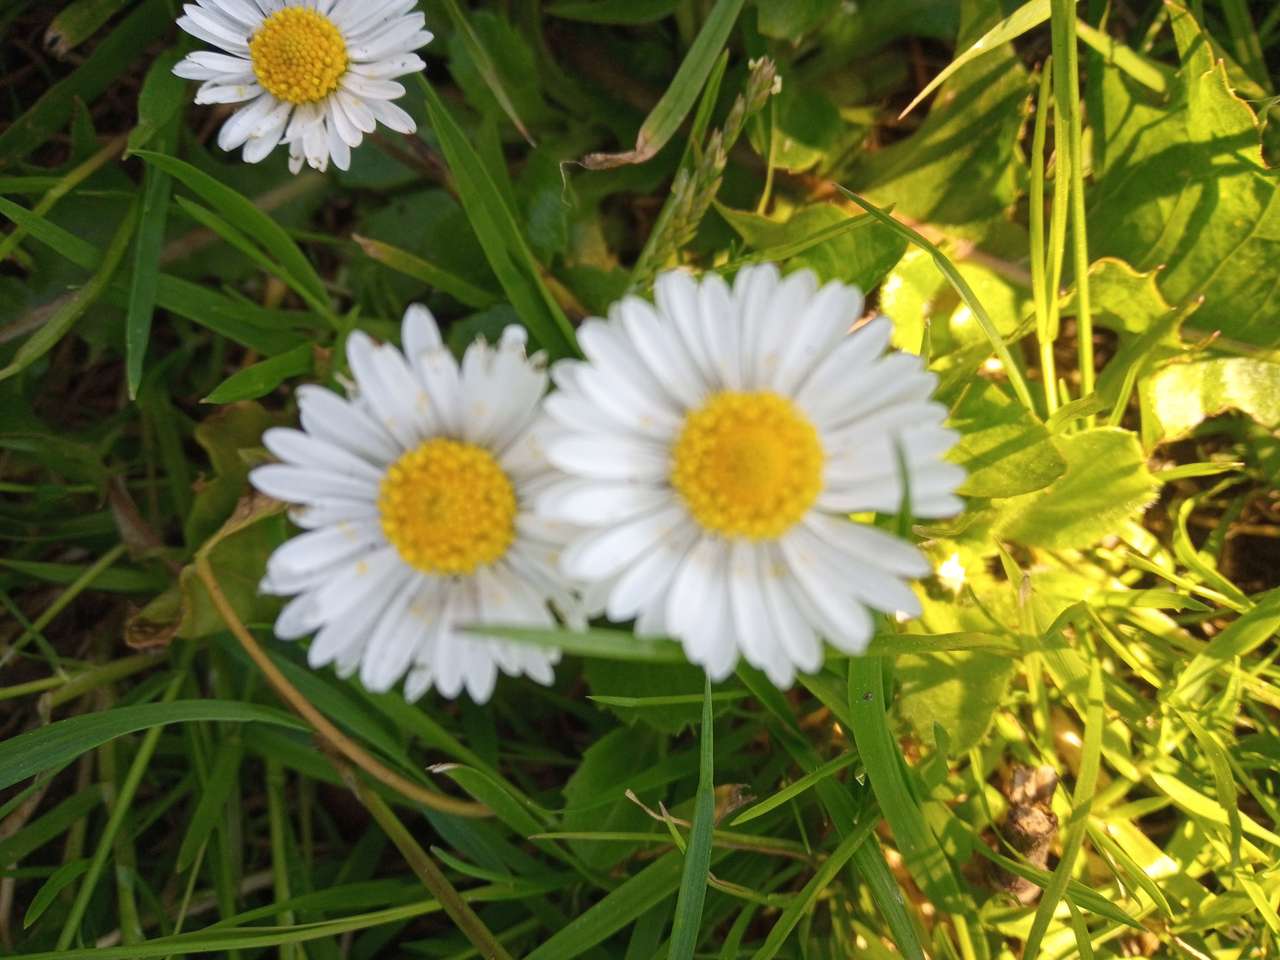 Daisy picture puzzle online from photo